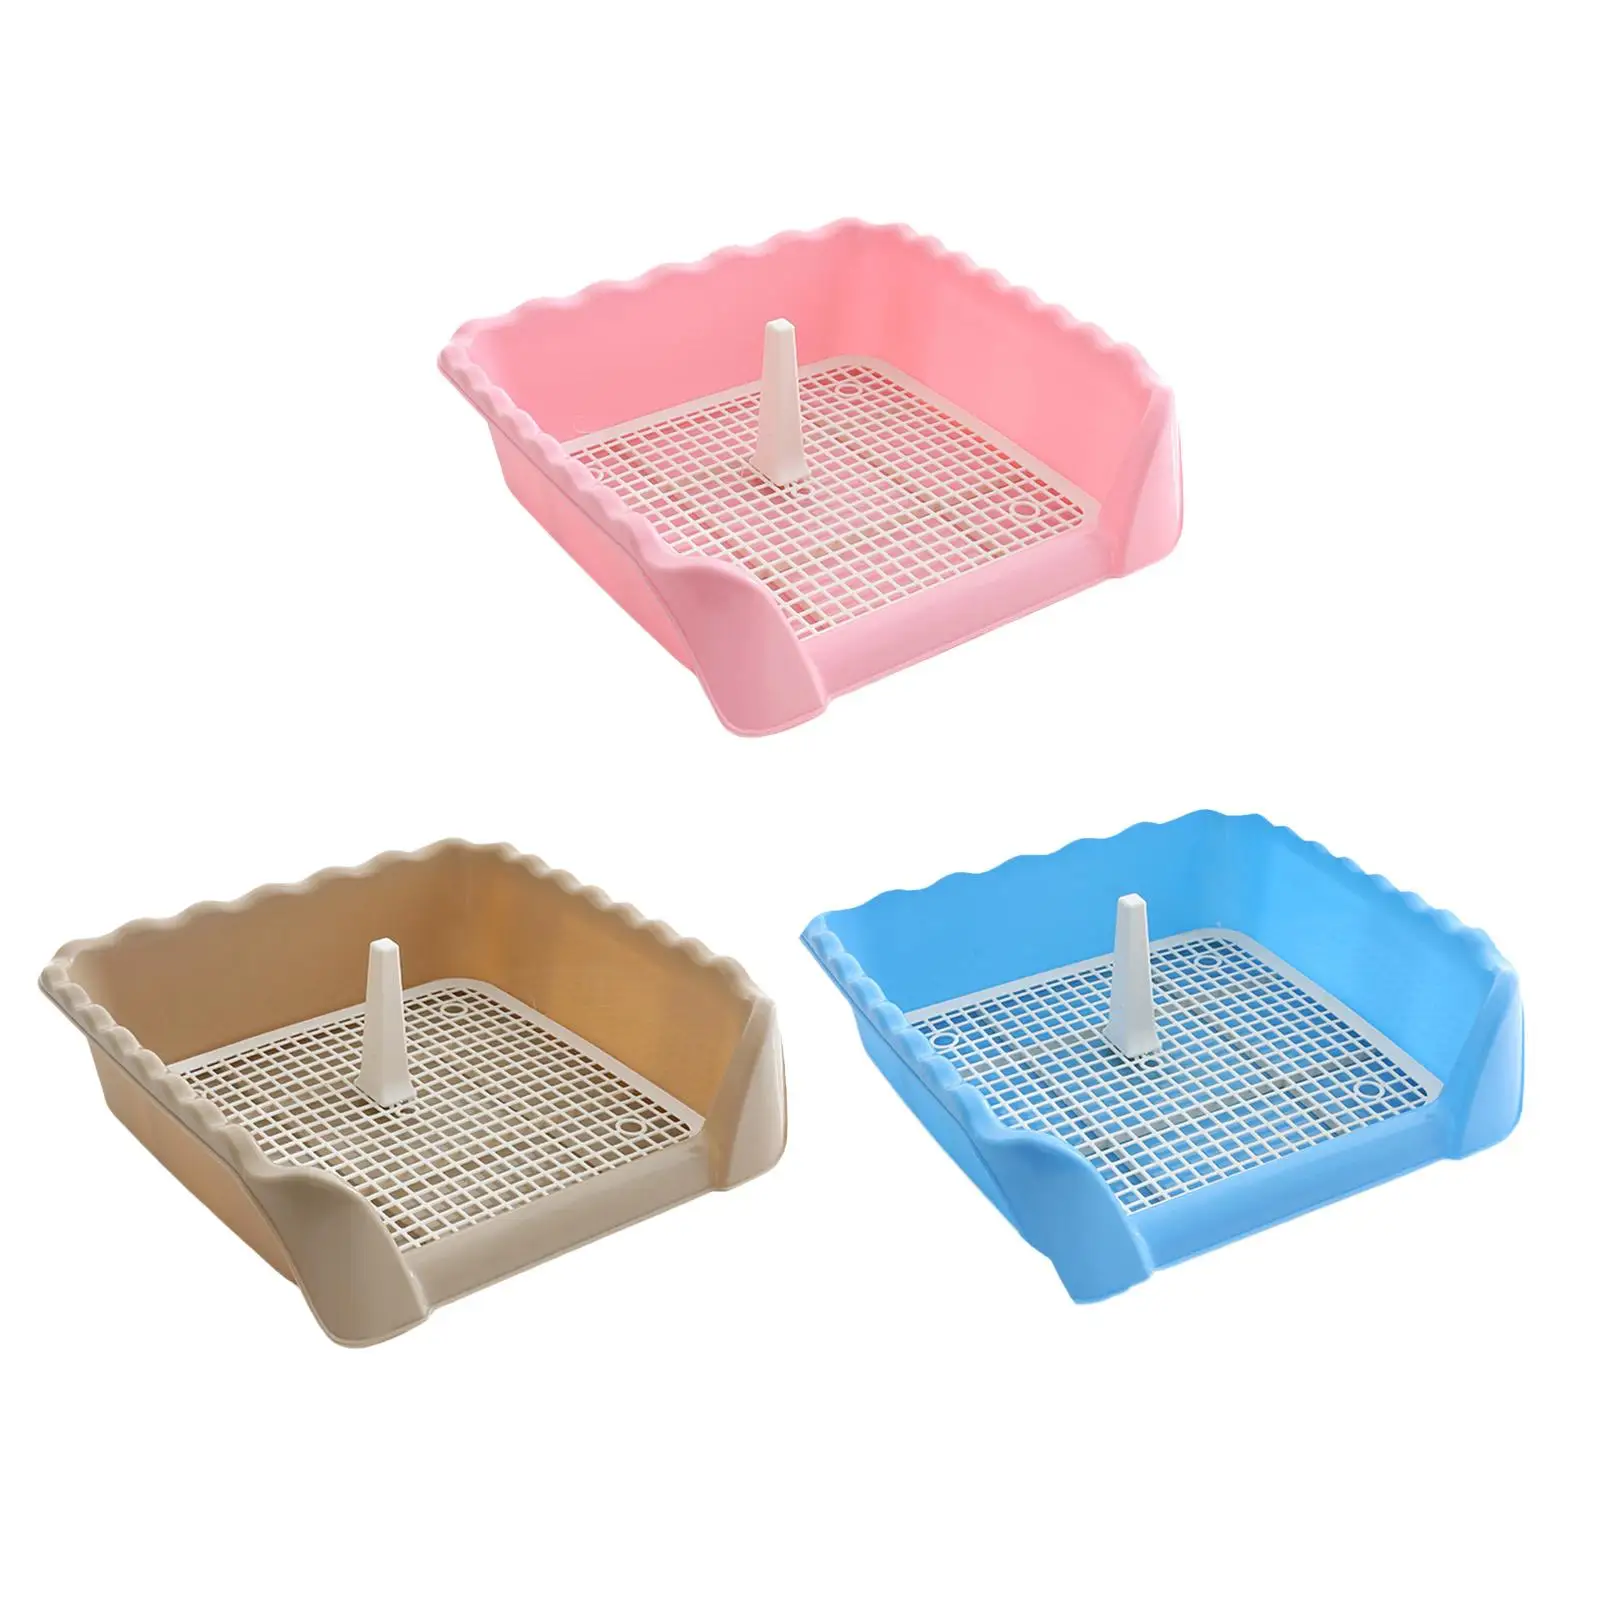 Indoor Dog Potty Tray Keep Floors Clean Non Slip Dog Toilet for Training Chinchilla